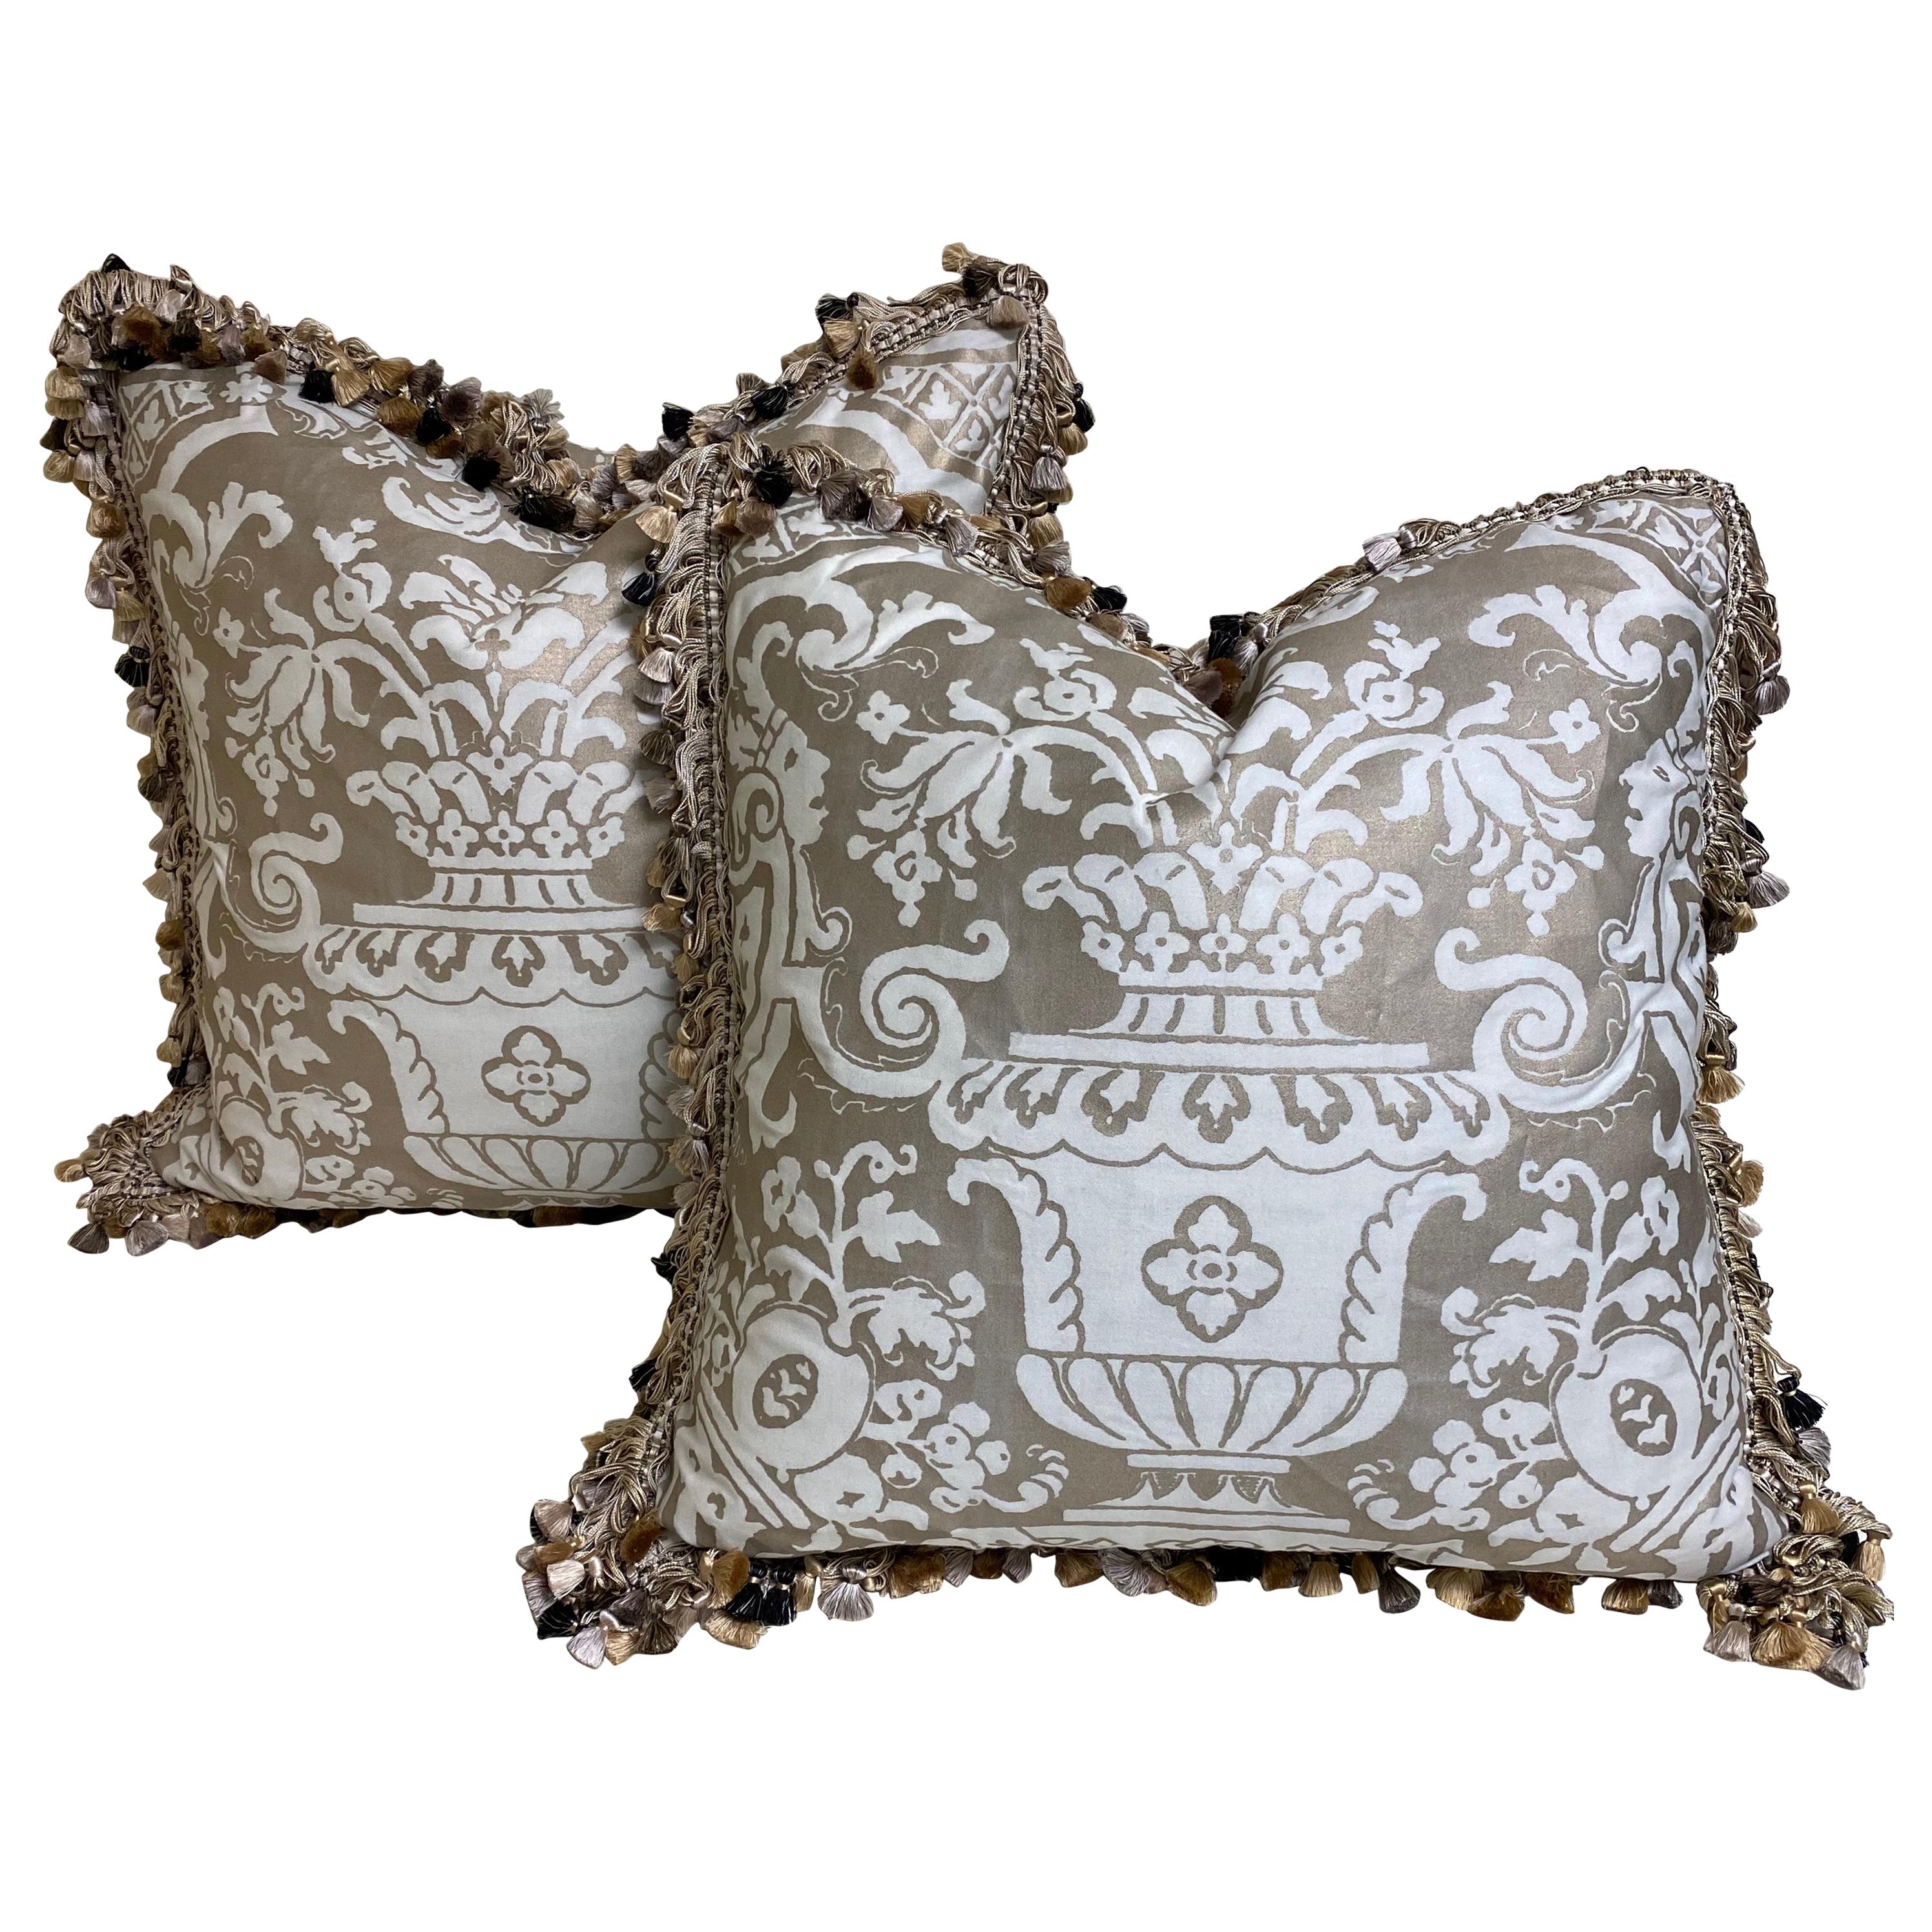 Pair of Fortuny Cushions with Tassle Fringe in the "Carnavalet" Pattern